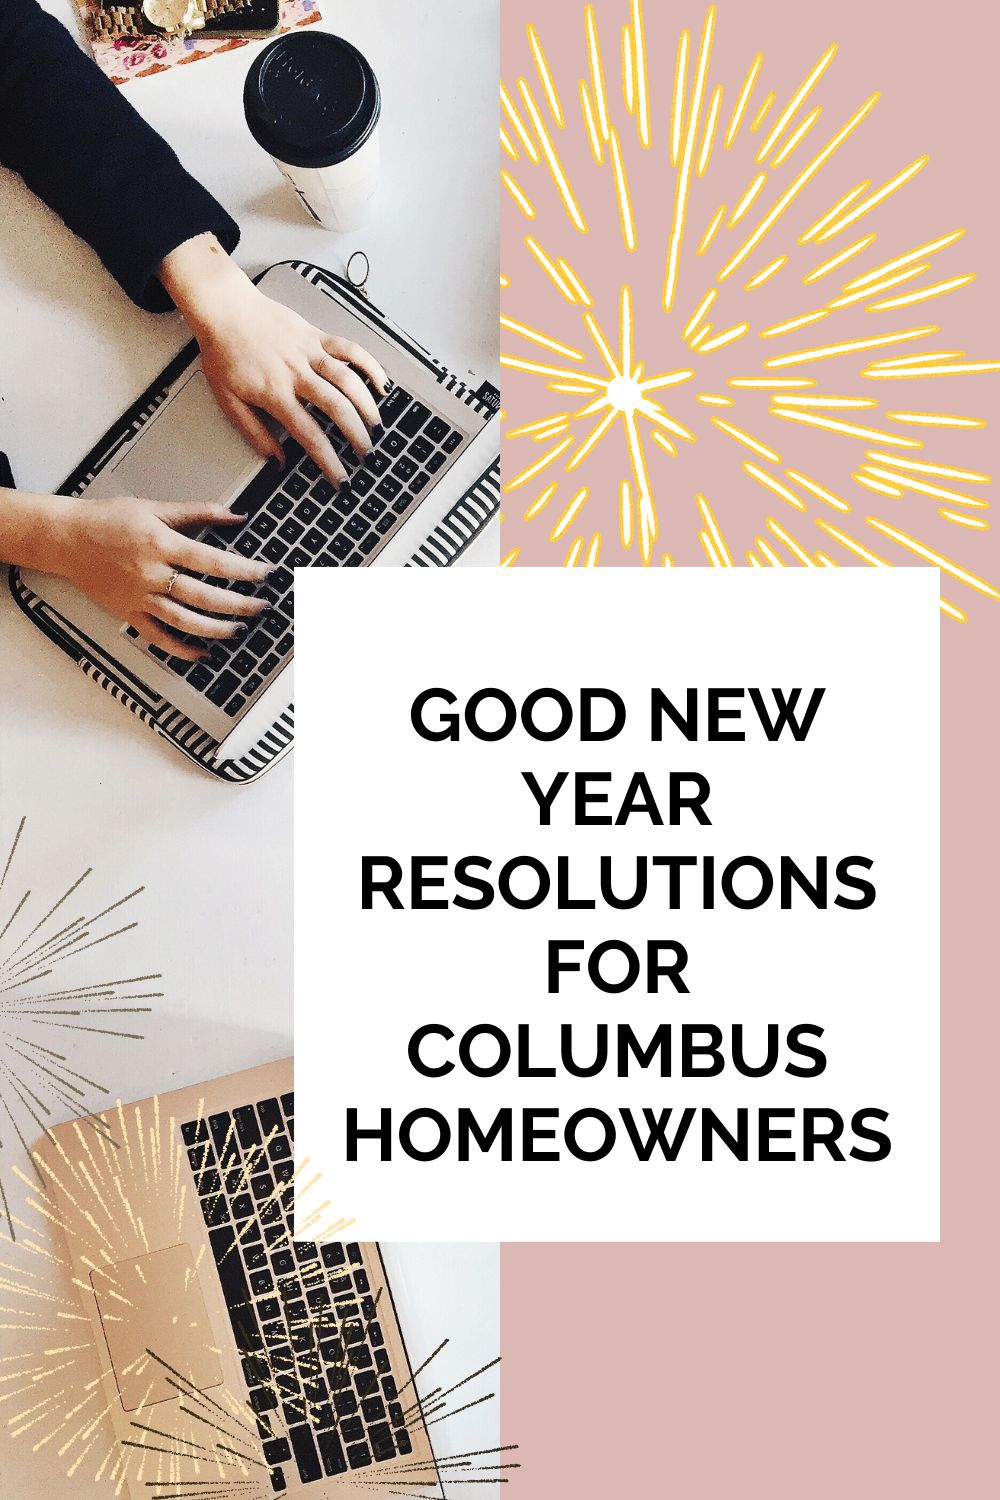 Good New Year Resolutions for Columbus Homeowners